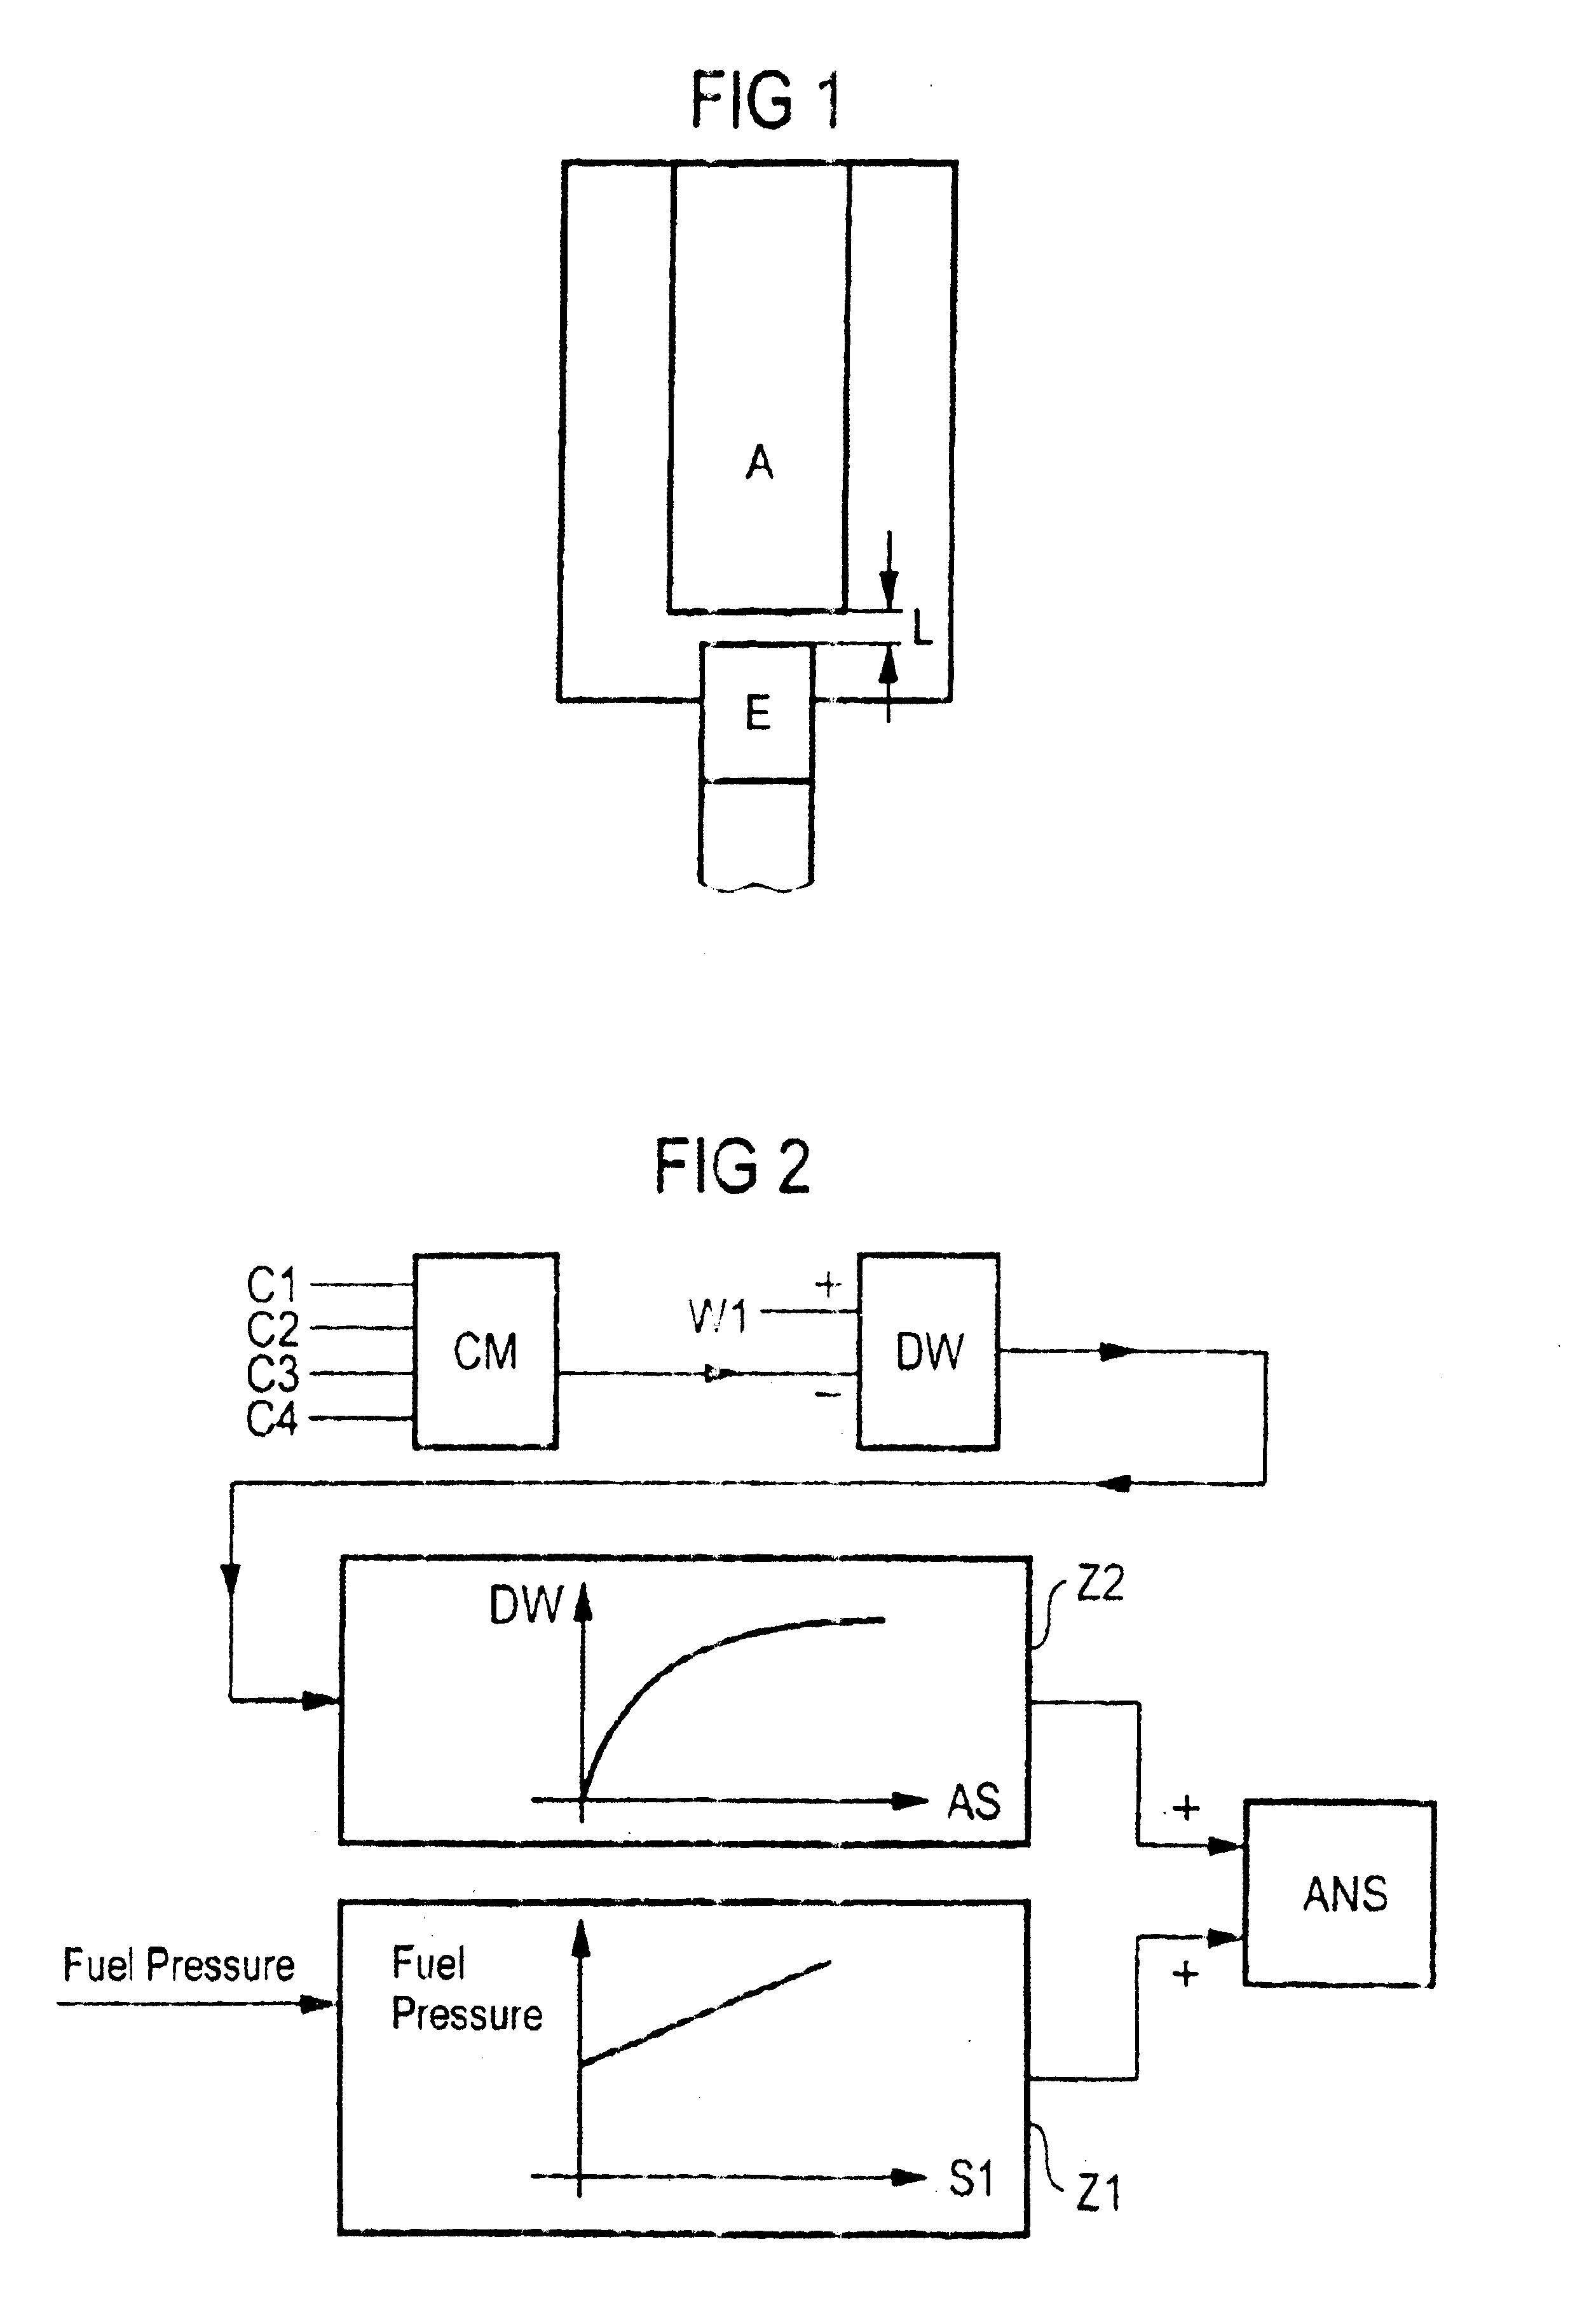 Method for controlling a piezoelectric actuator which is used to displace an element